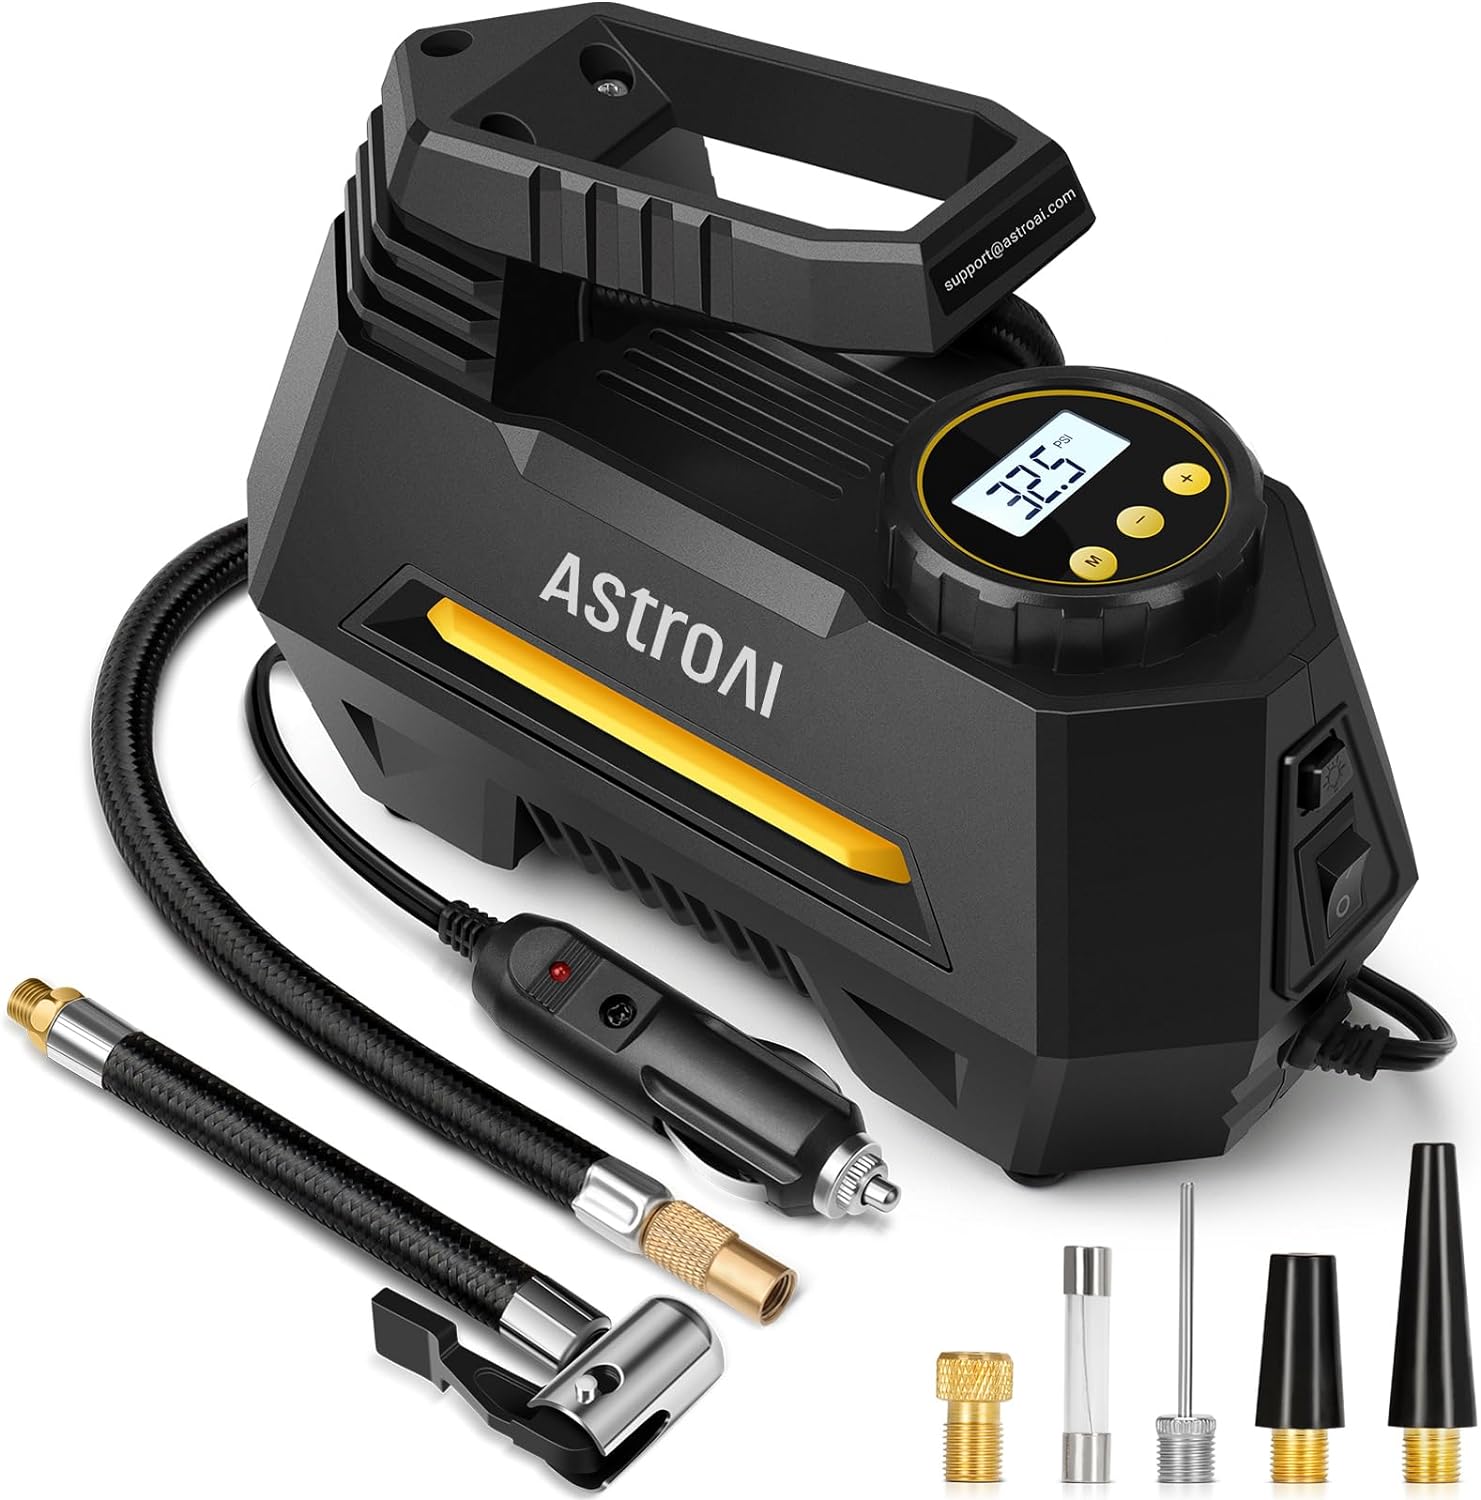 AstroAI Tire Inflator Portable Air Compressor Air Pump for Car Tires - 12V DC Auto Pump with Digital Pressure Gauge, 100PSI with Emergency LED Light